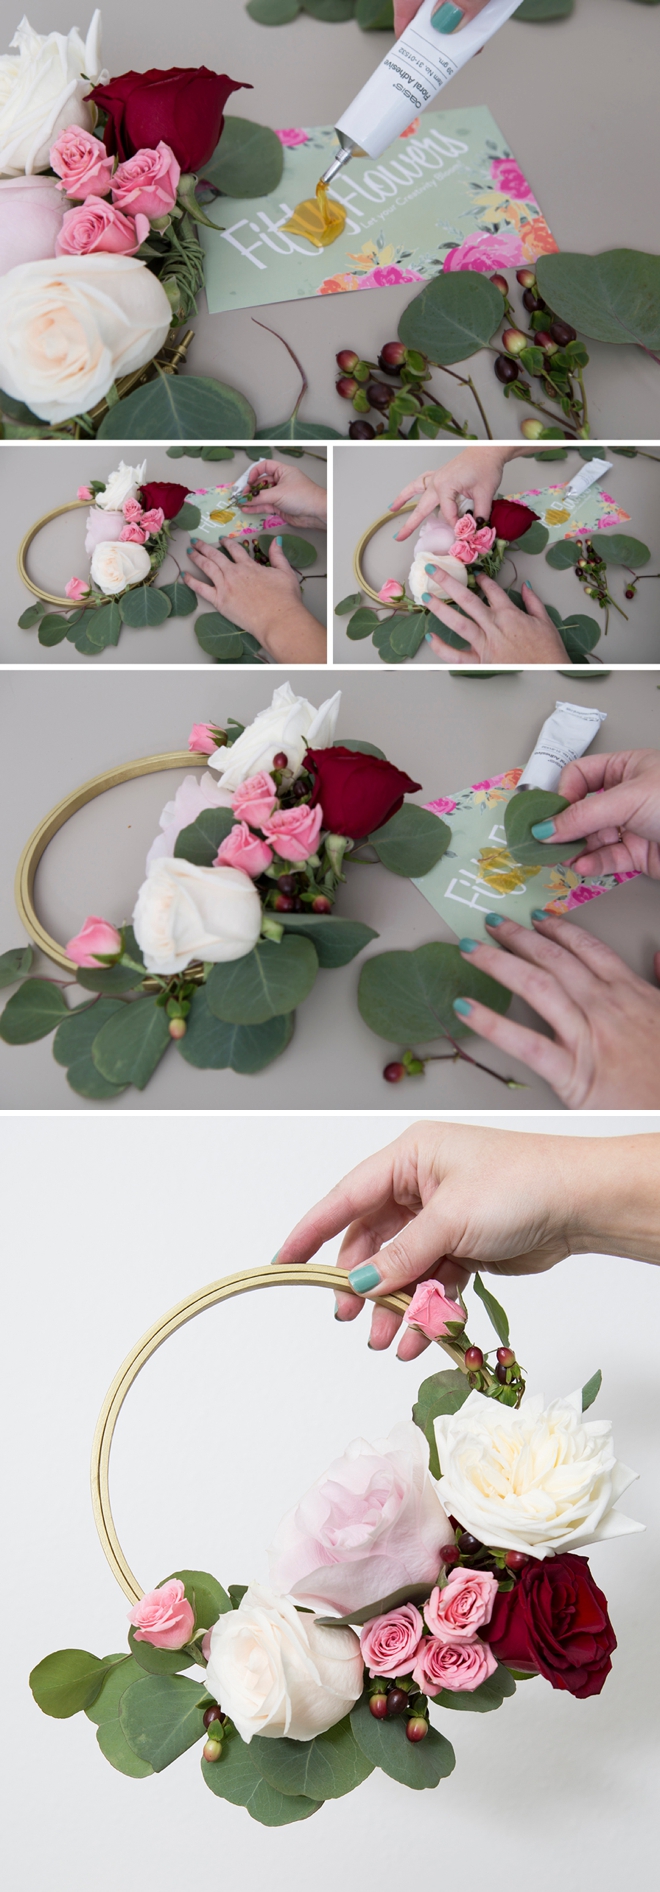 WOW, these DIY flower decor hoops are spectacular!